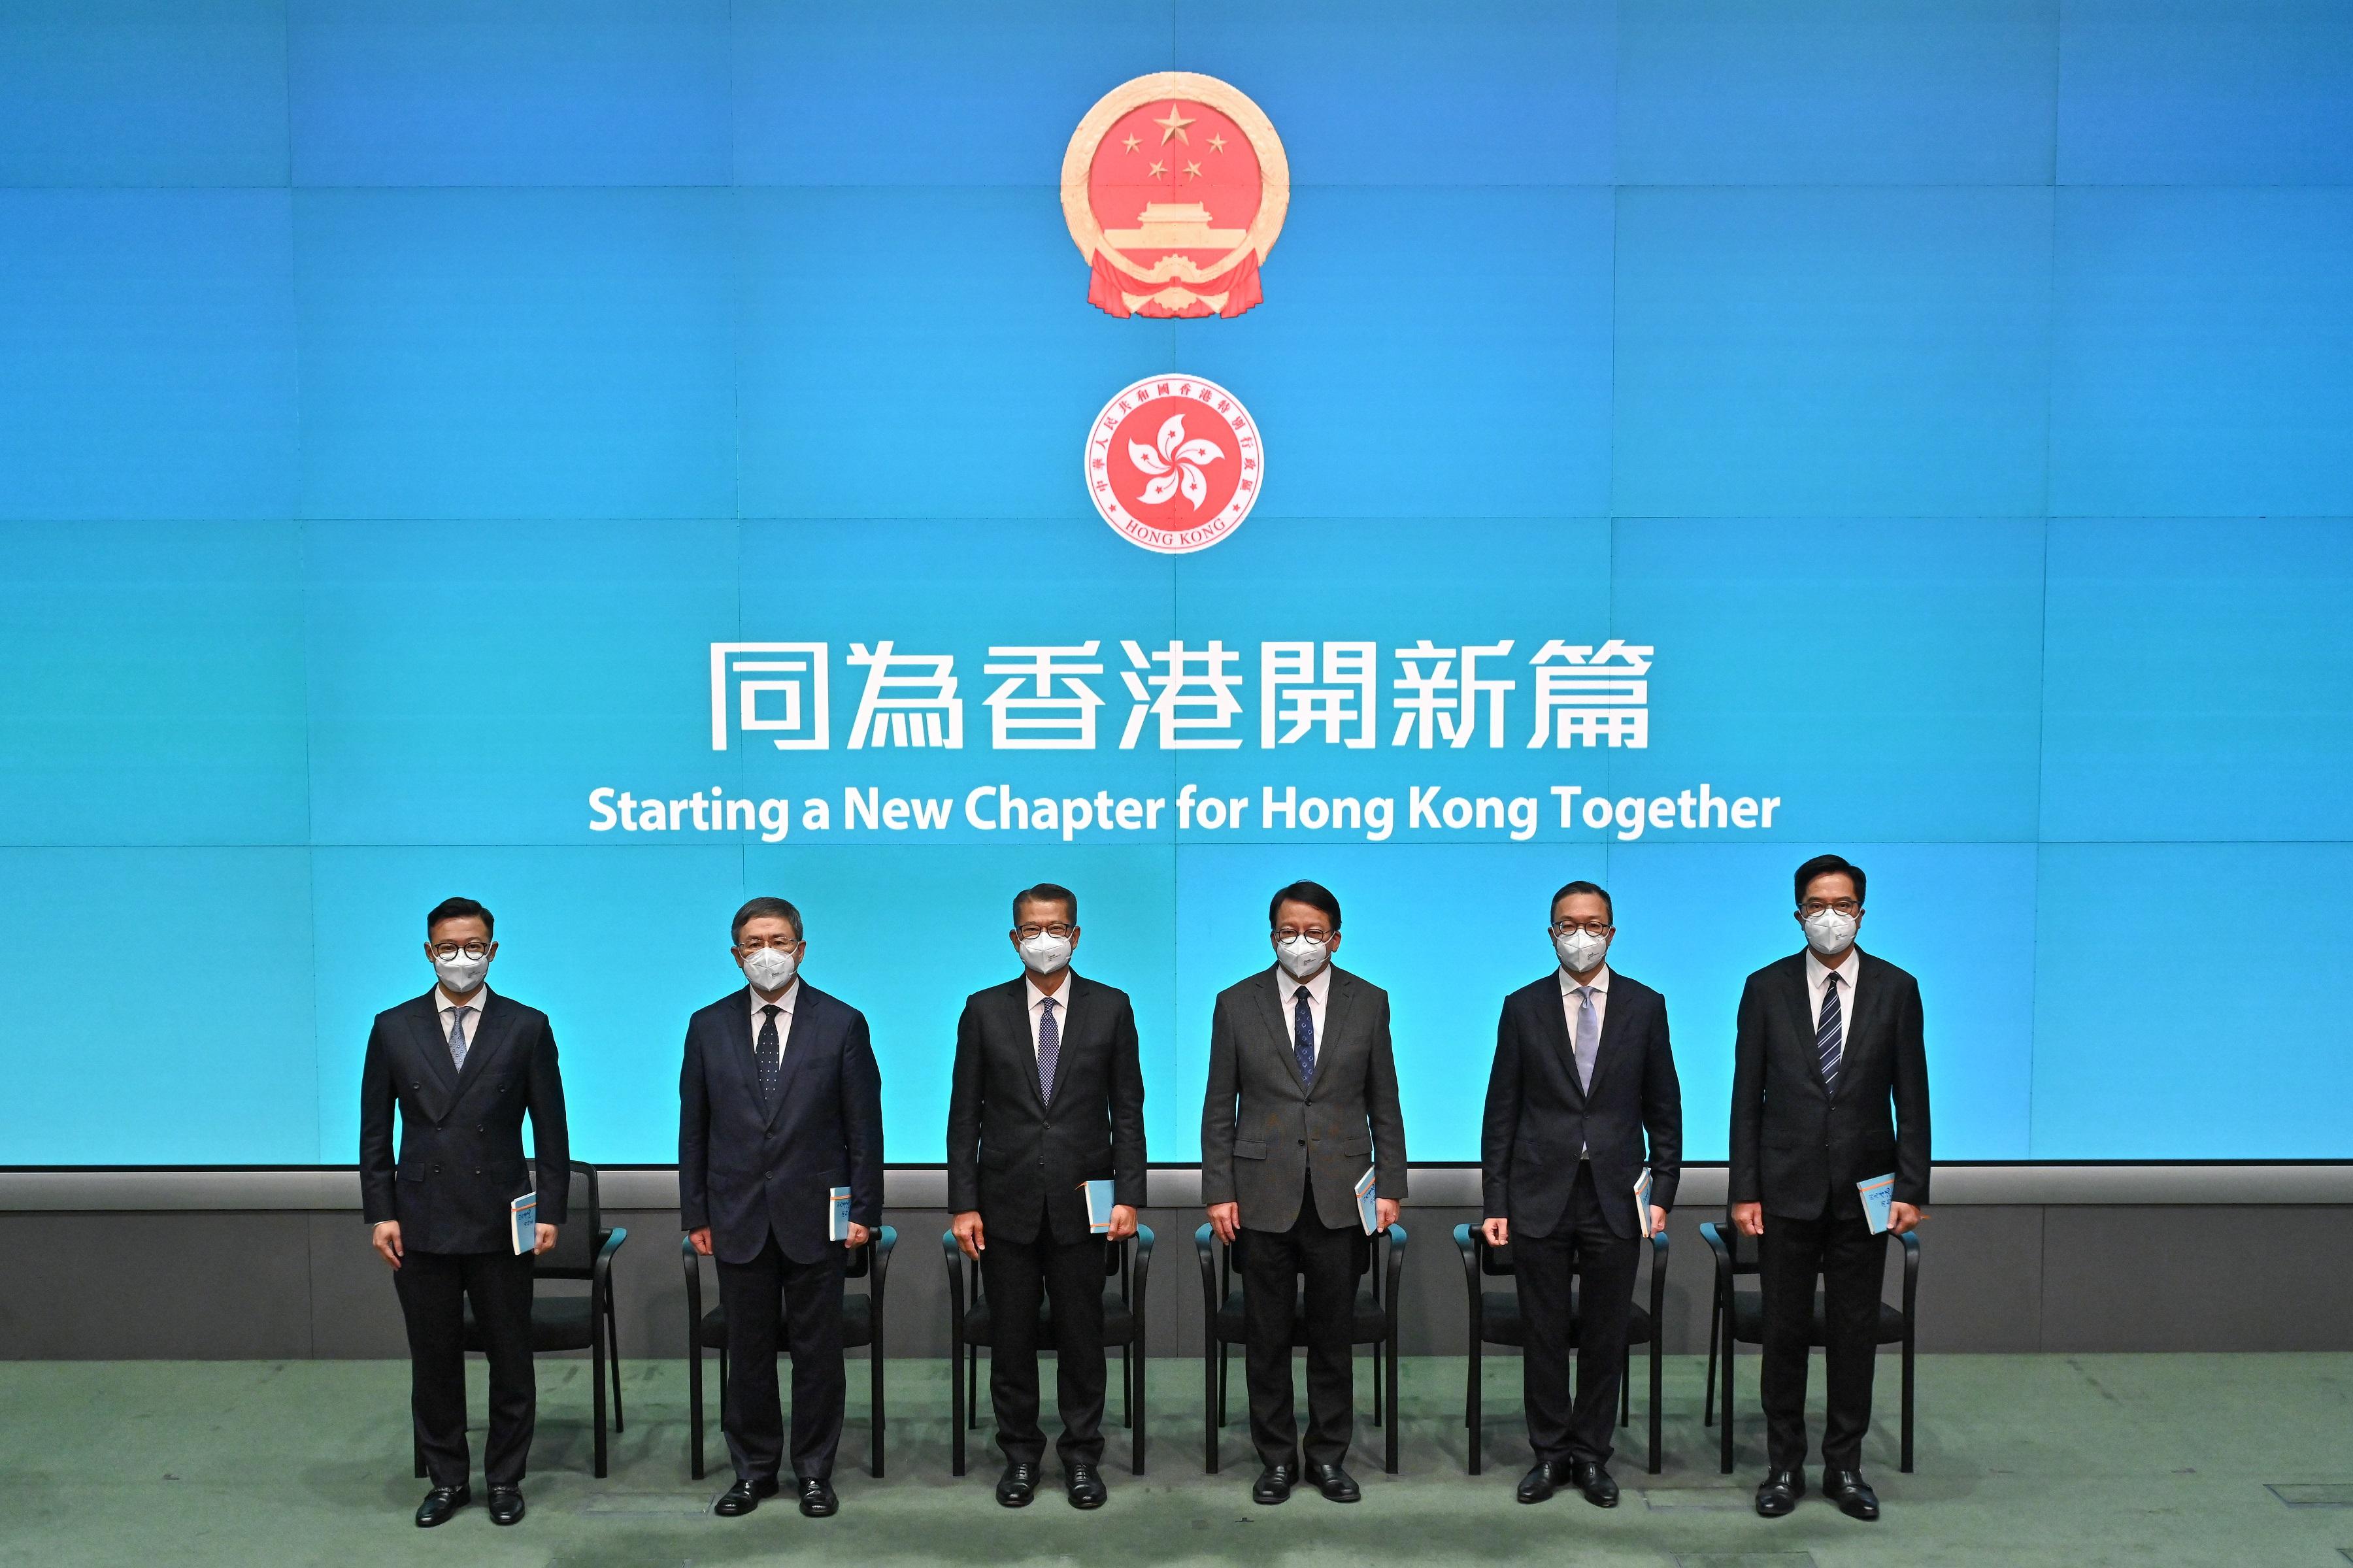 Principal Officials of the sixth-term of the Hong Kong Special Administrative Region Government, the Chief Secretary for Administration (designate), Mr Chan Kwok-ki (third right); the Financial Secretary (designate), Mr Paul Chan (third left); the Secretary for Justice (designate), Mr Paul Lam Ting-kwok, SC (second right); the Deputy Chief Secretary for Administration (designate), Mr Cheuk Wing-hing (second left); the Deputy Financial Secretary (designate), Mr Michael Wong (first right), and the Deputy Secretary for Justice (designate), Mr Cheung Kwok-kwan (first left), meet the media today (June 19).